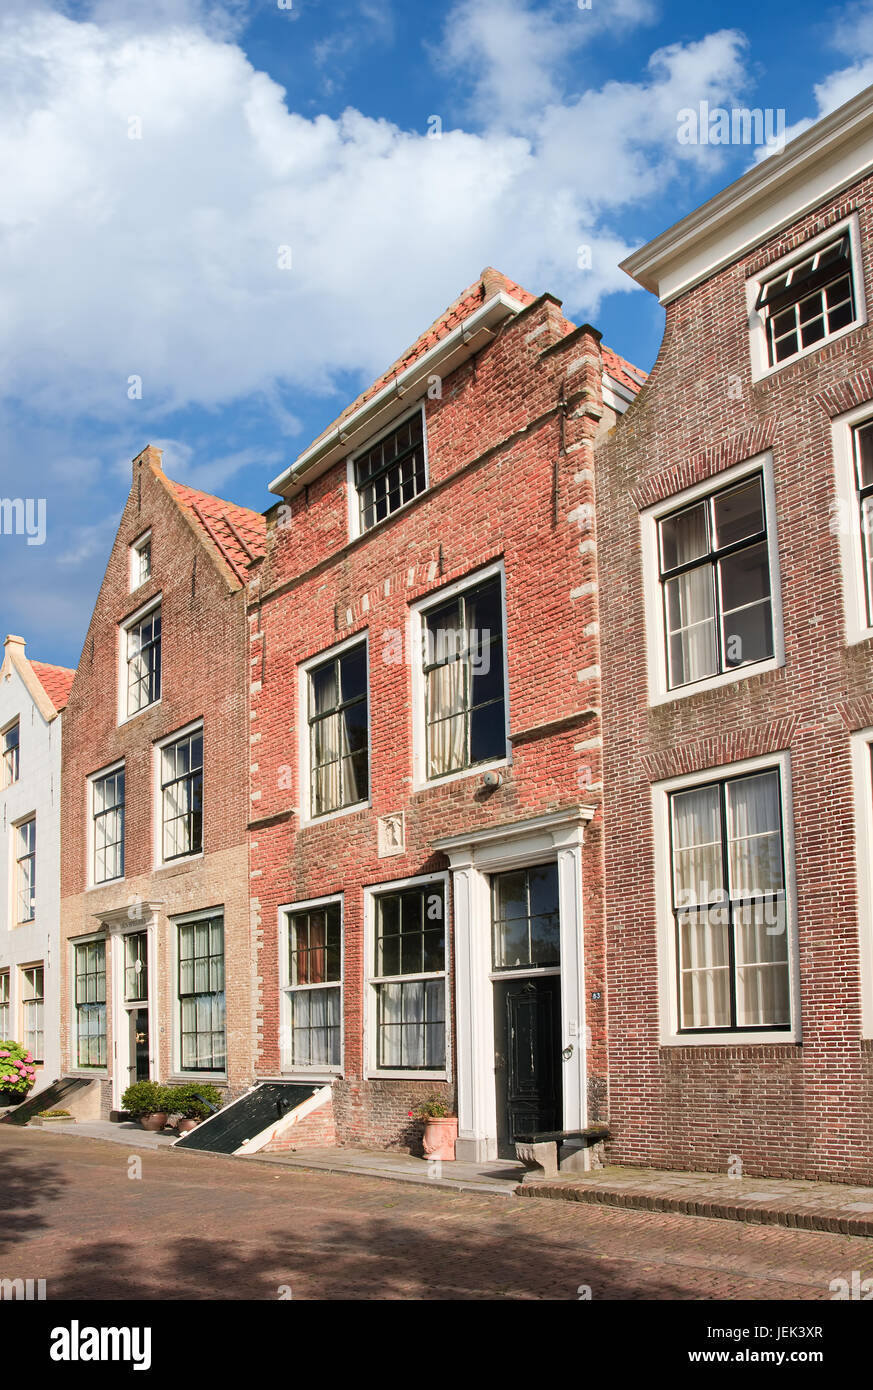 Street with row of ancient brickwork mansions, Veere, Netherlands Stock Photo